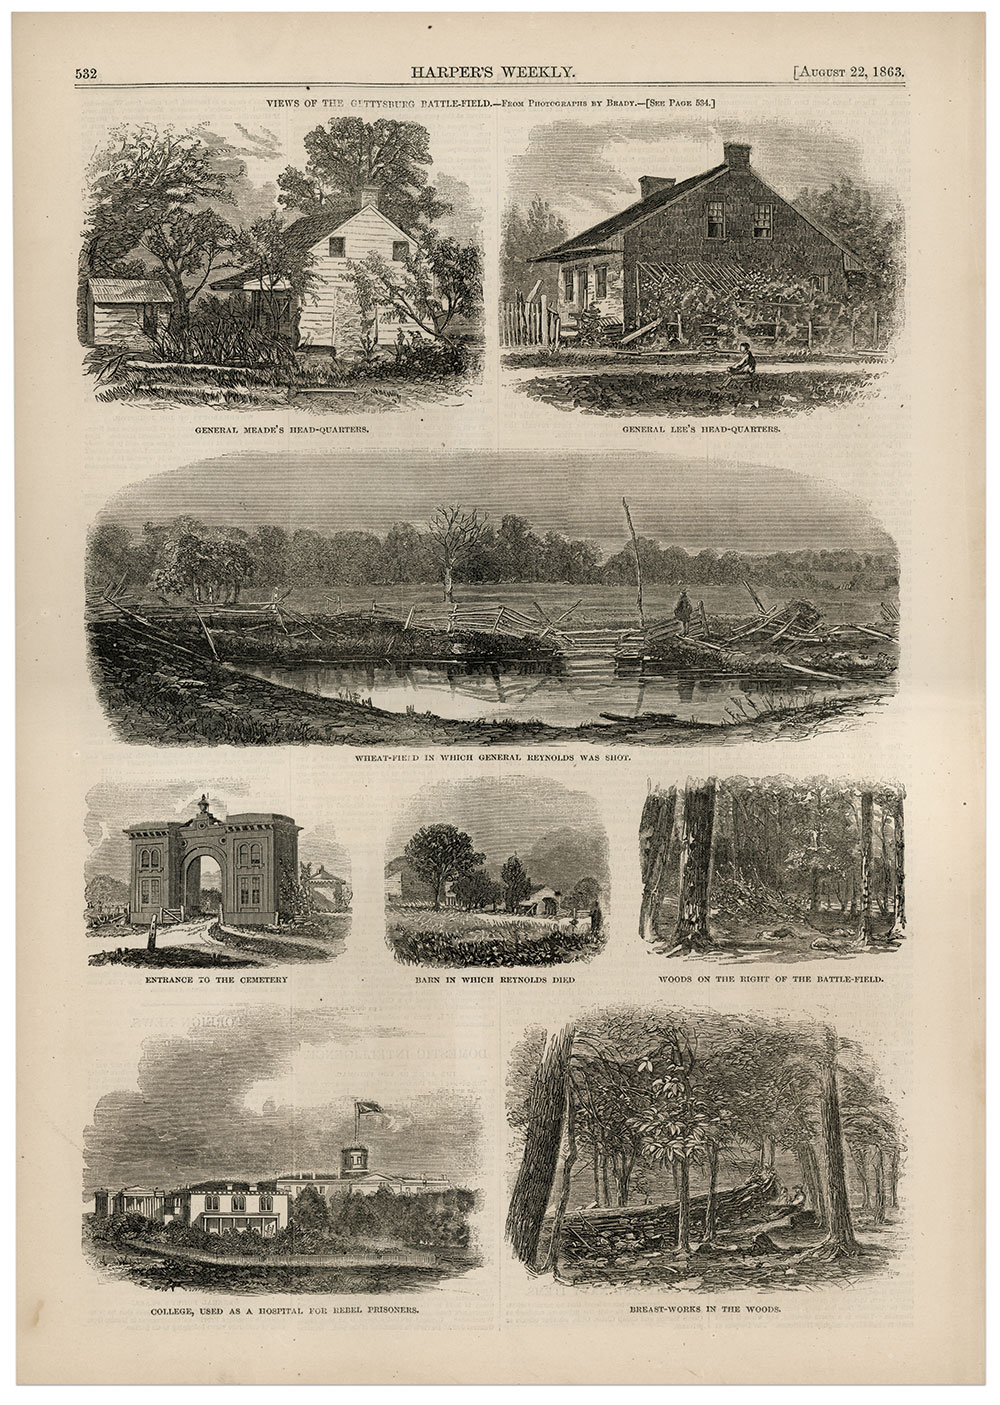 The Aug. 22, 1863, issue of Harper’s Weekly featured 11 engravings from Brady’s Gettysburg photographs. The prisoners’ image was excluded. Eight are shown here. Another view was published on an adjacent page, and two on the cover—John Burns and his home. Military Images.